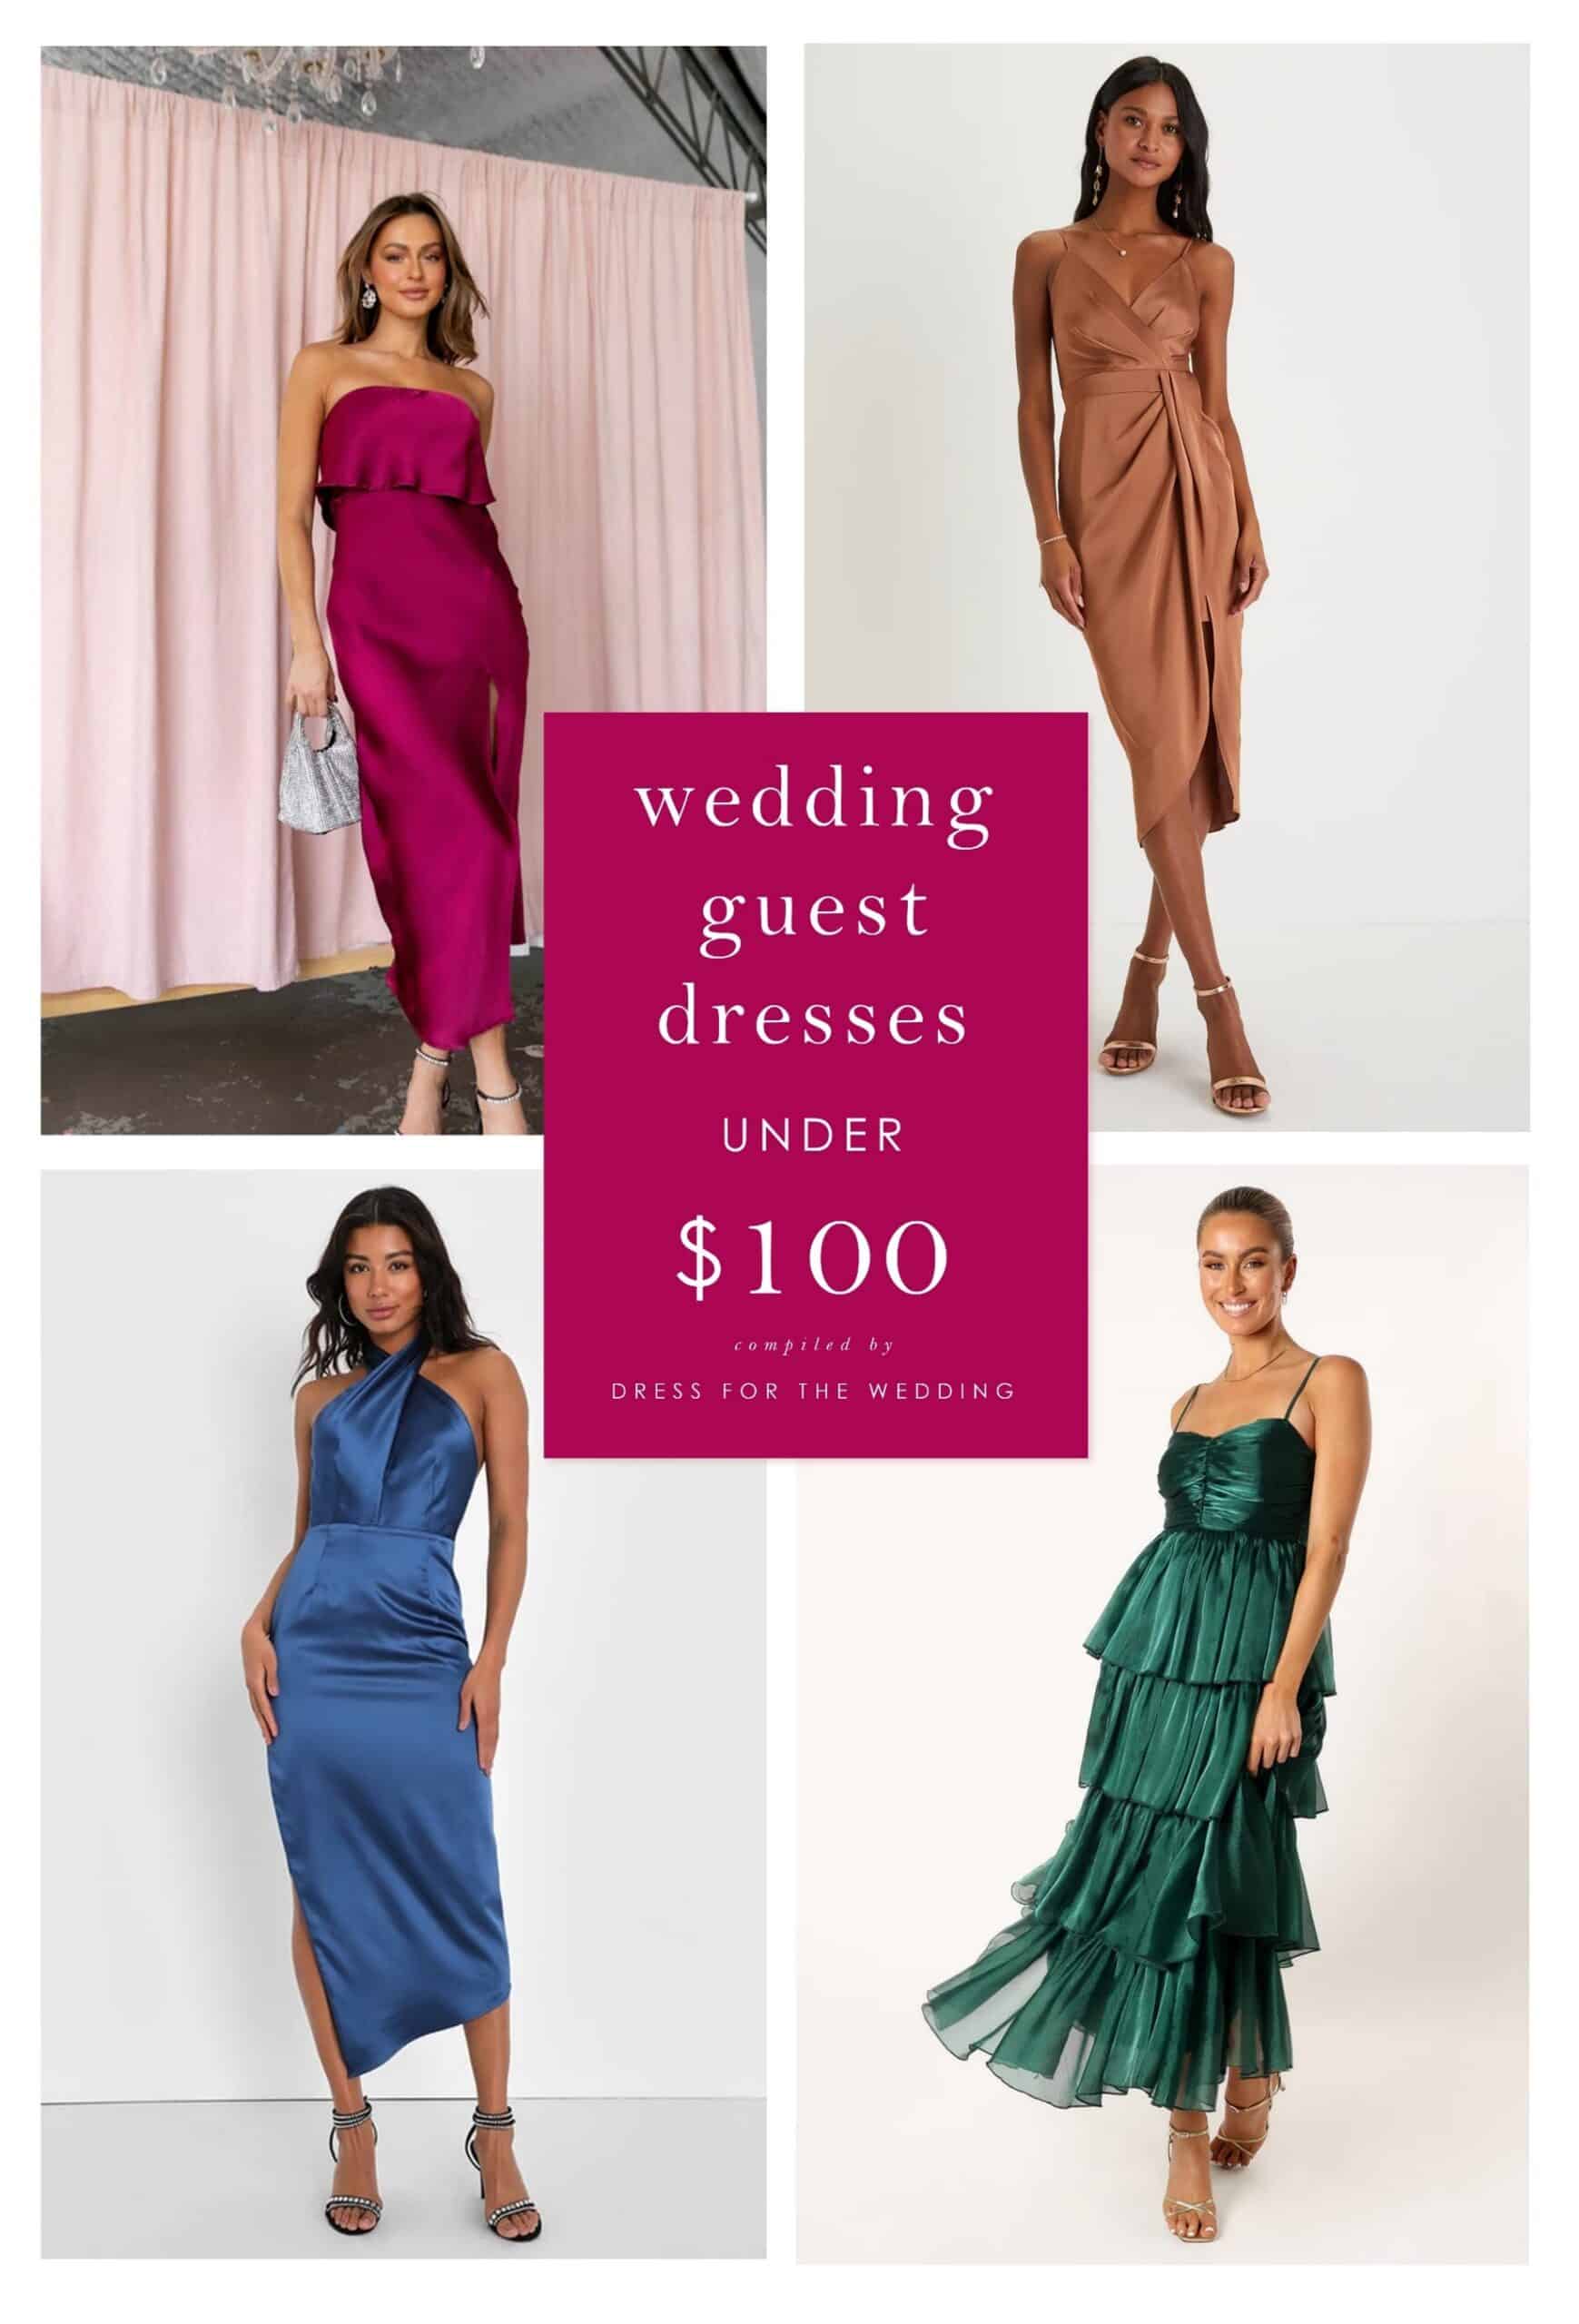 Wedding Guest Outfit Ideas that are Affordable - Majean G